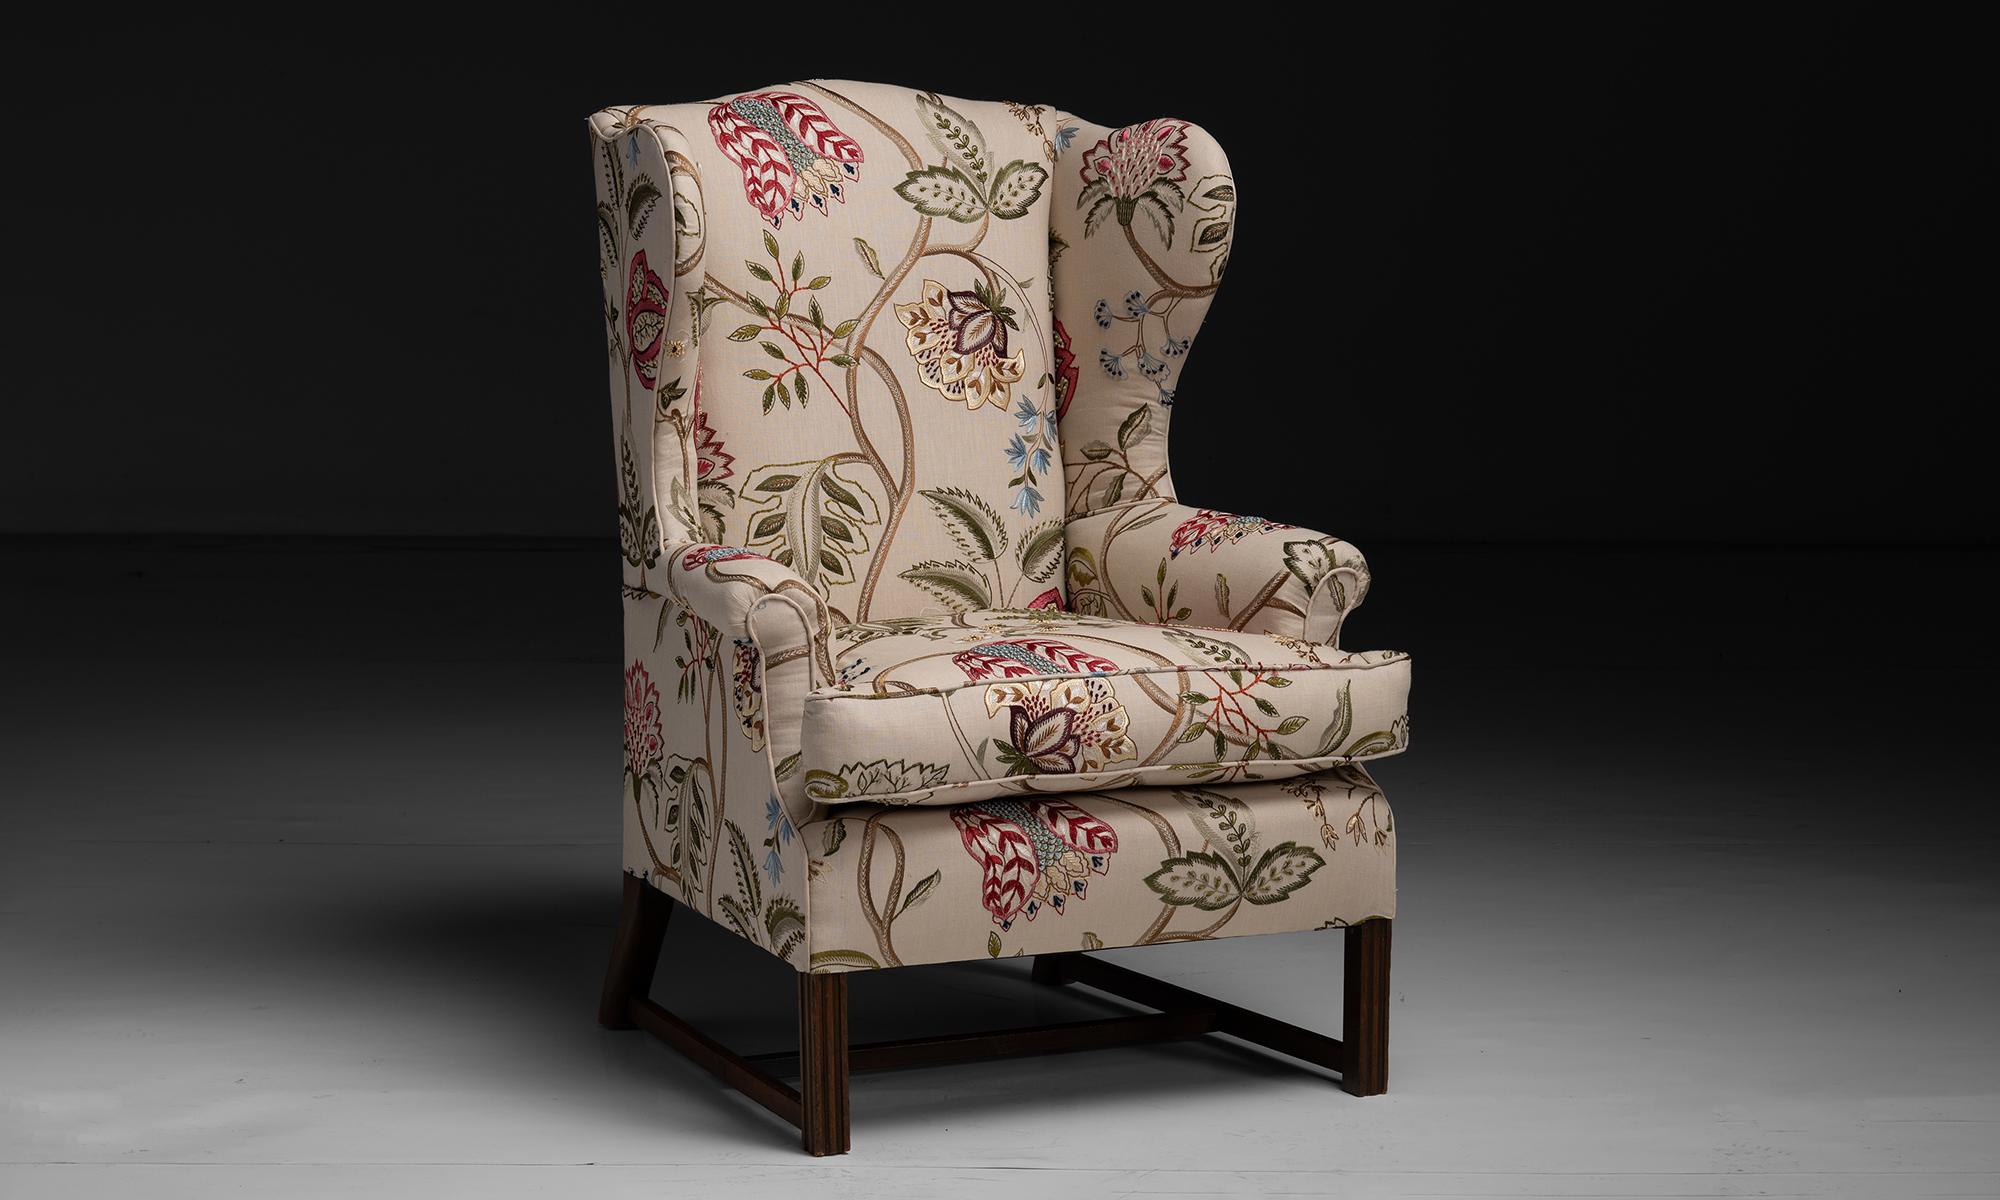 Wingback in Embroidered Linen by Pierre Frey

England circa 1890

George III style wingback armchair newly upholstered in embroidered linen blend by Pierre Frey.

28”w x 28”d x 42.5”h x 20”seat